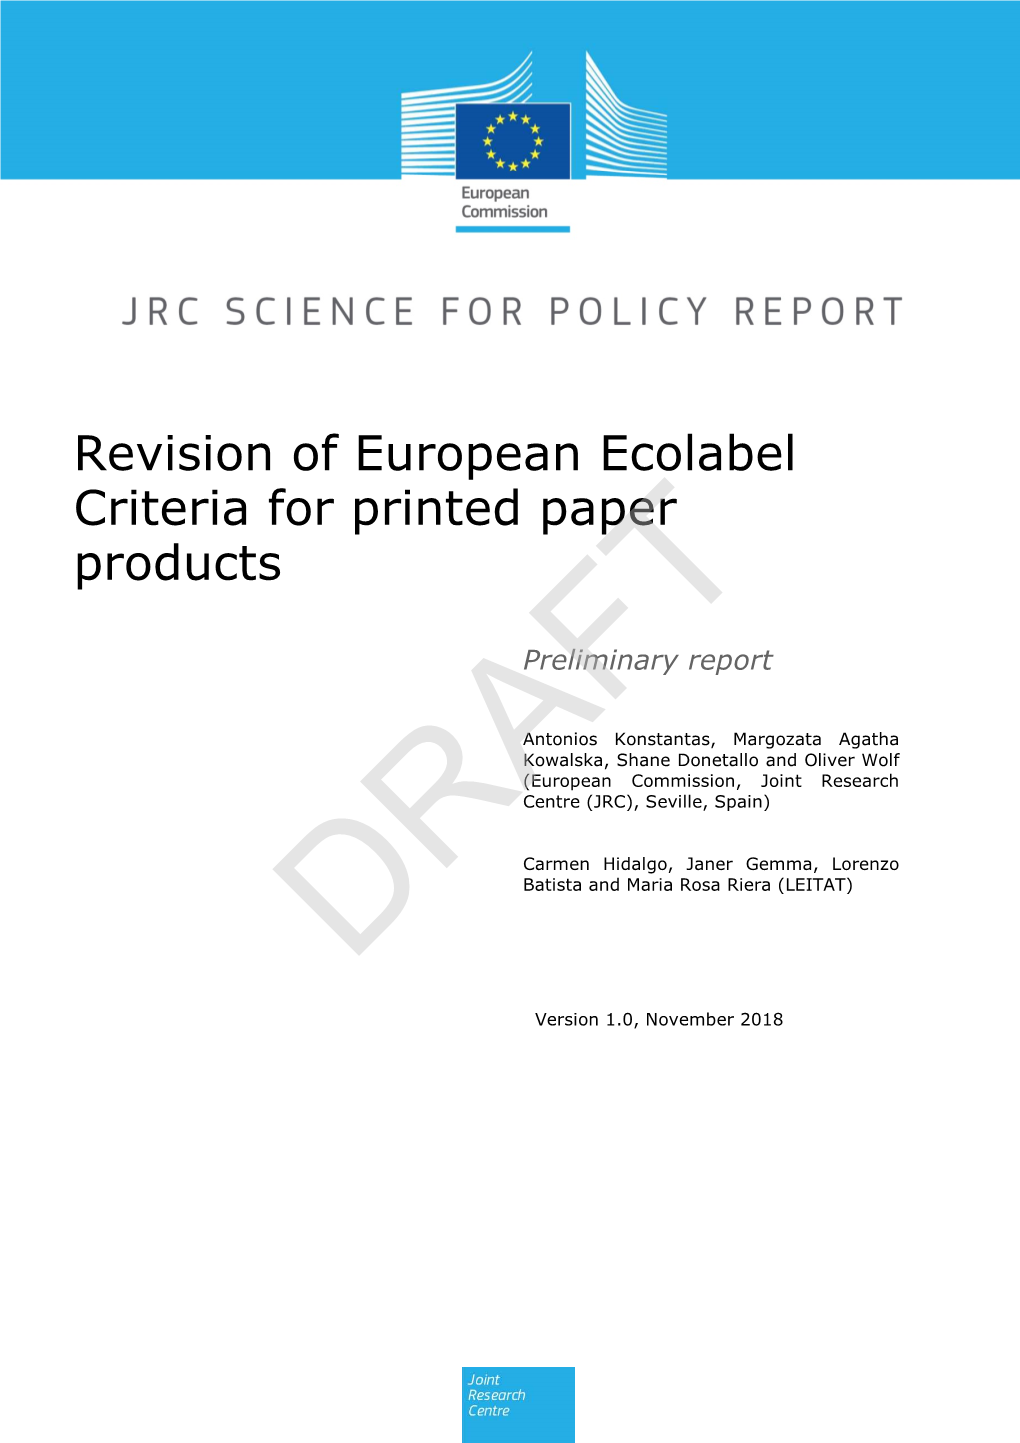 Revision of European Ecolabel Criteria for Printed Paper Products